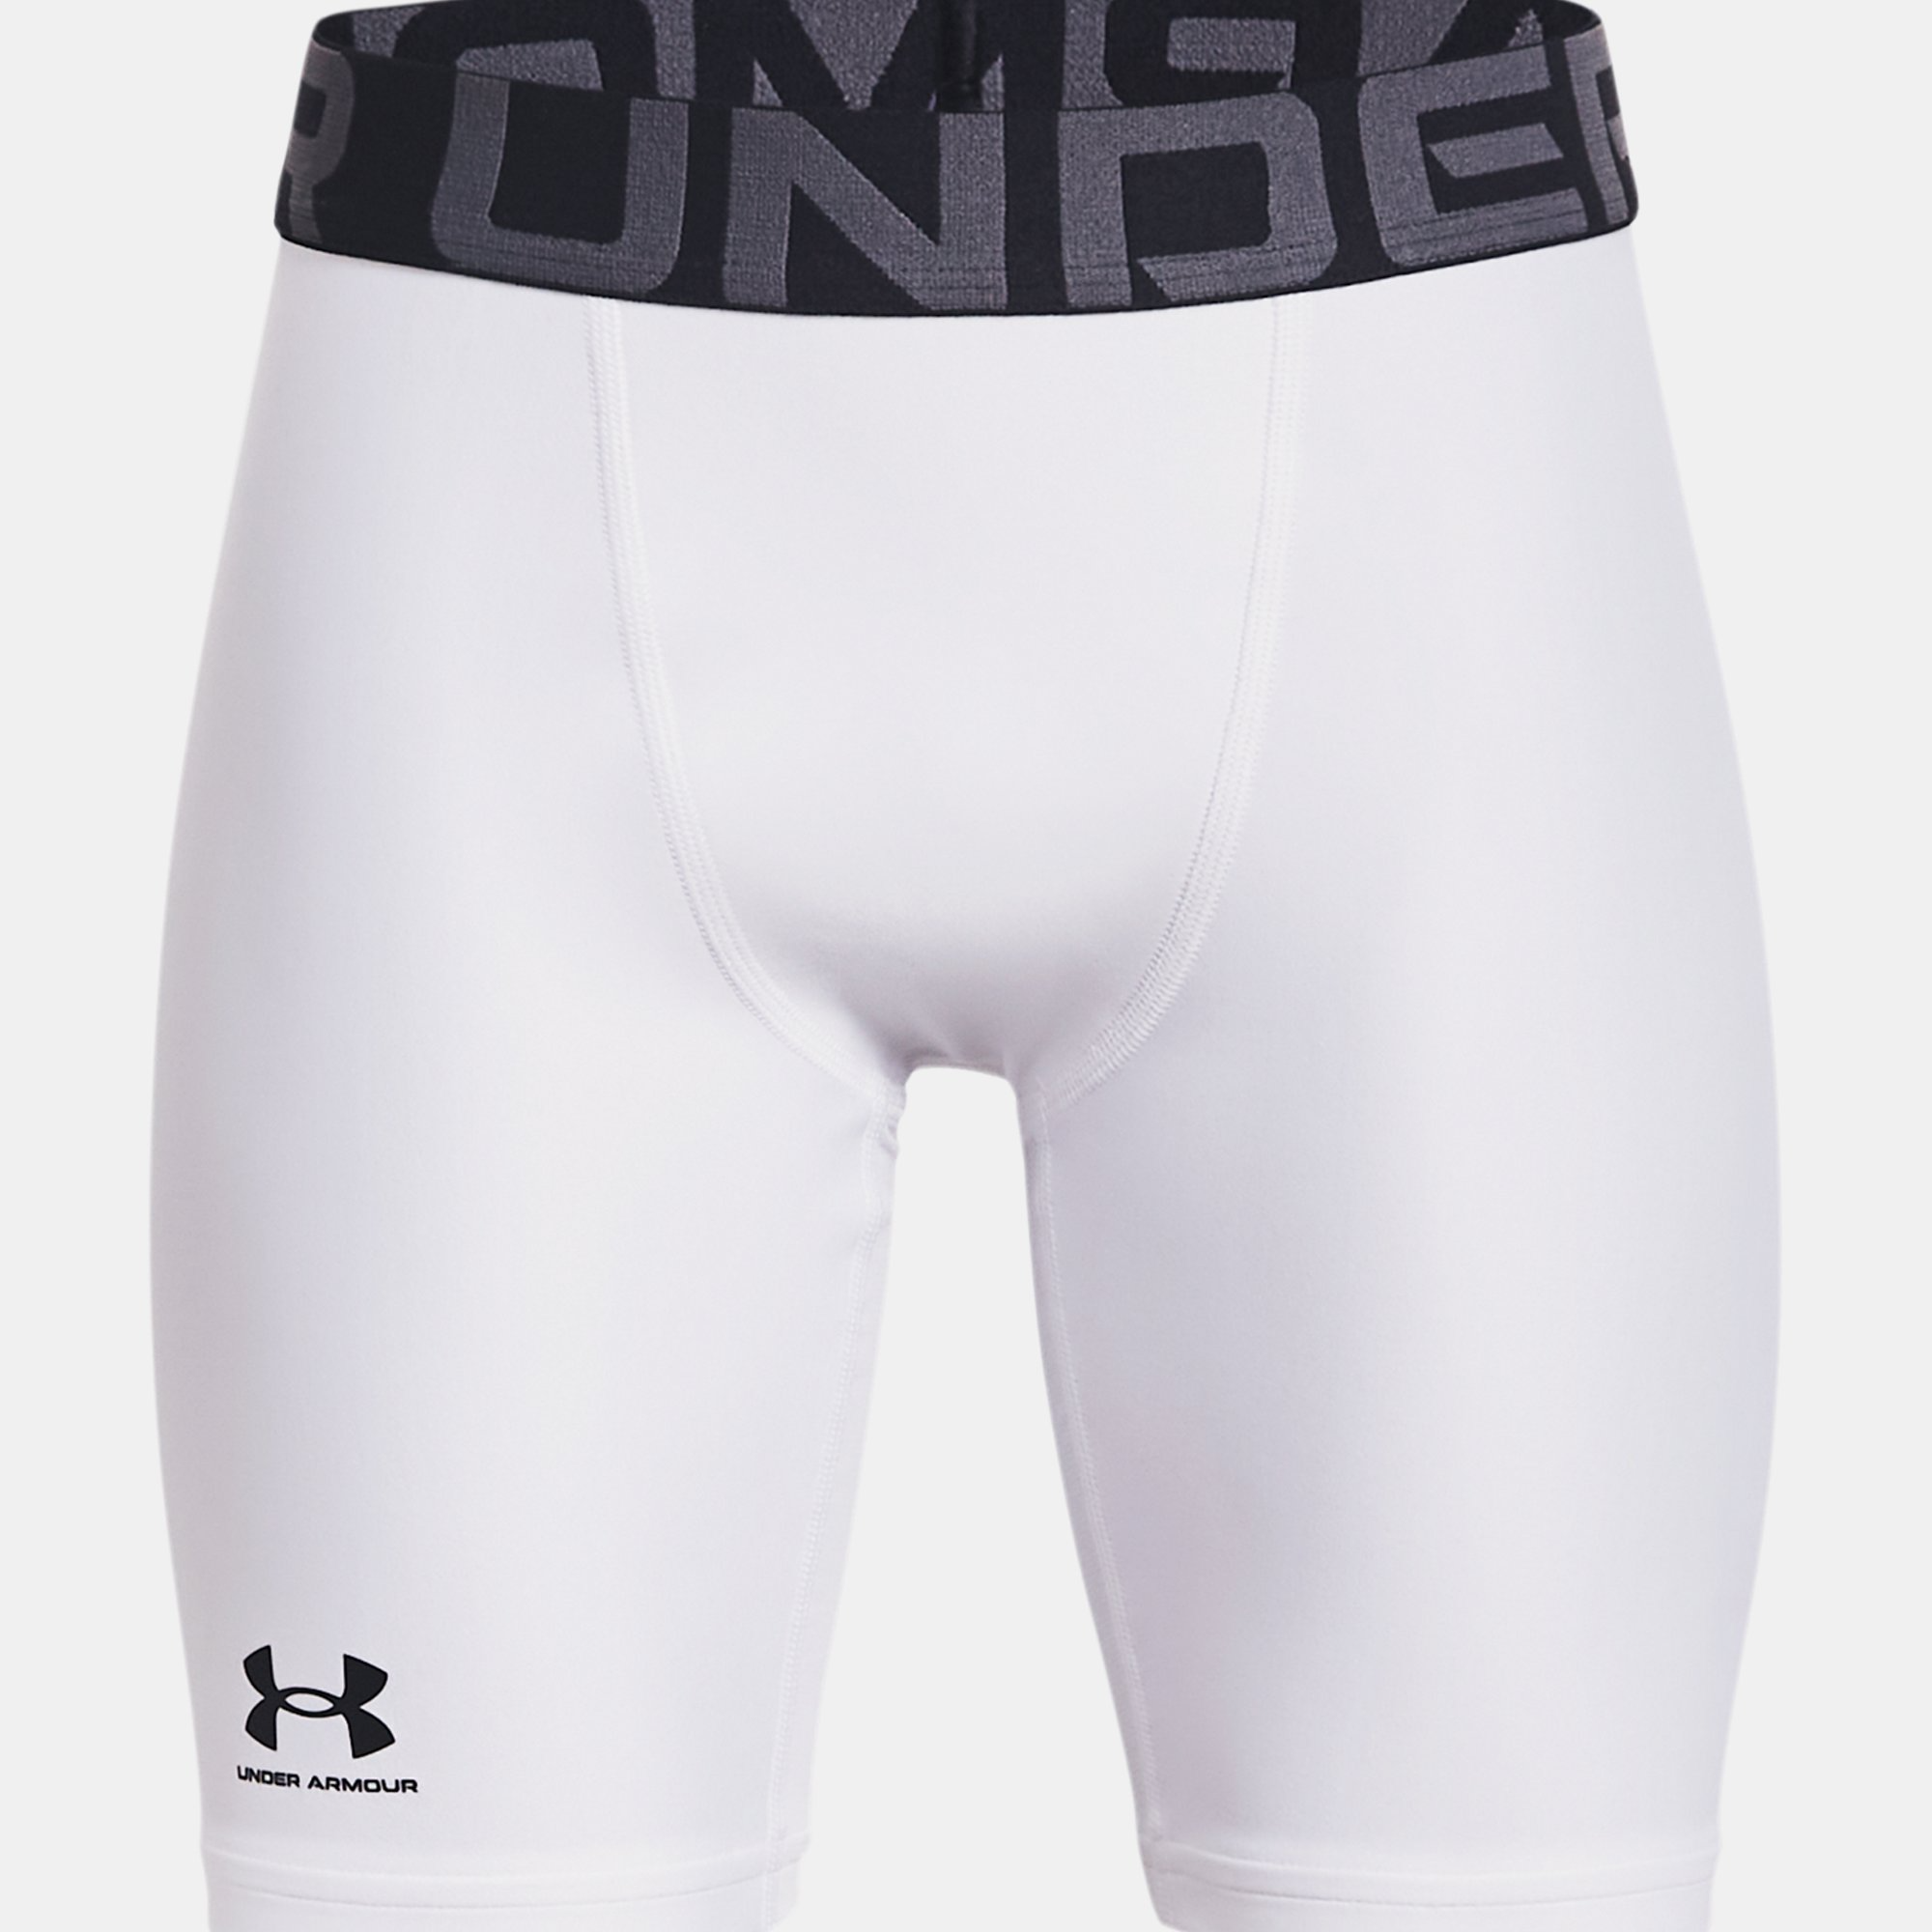 stefanssoccer.com:UA Youth HearGear Armour Compression Shorts - White